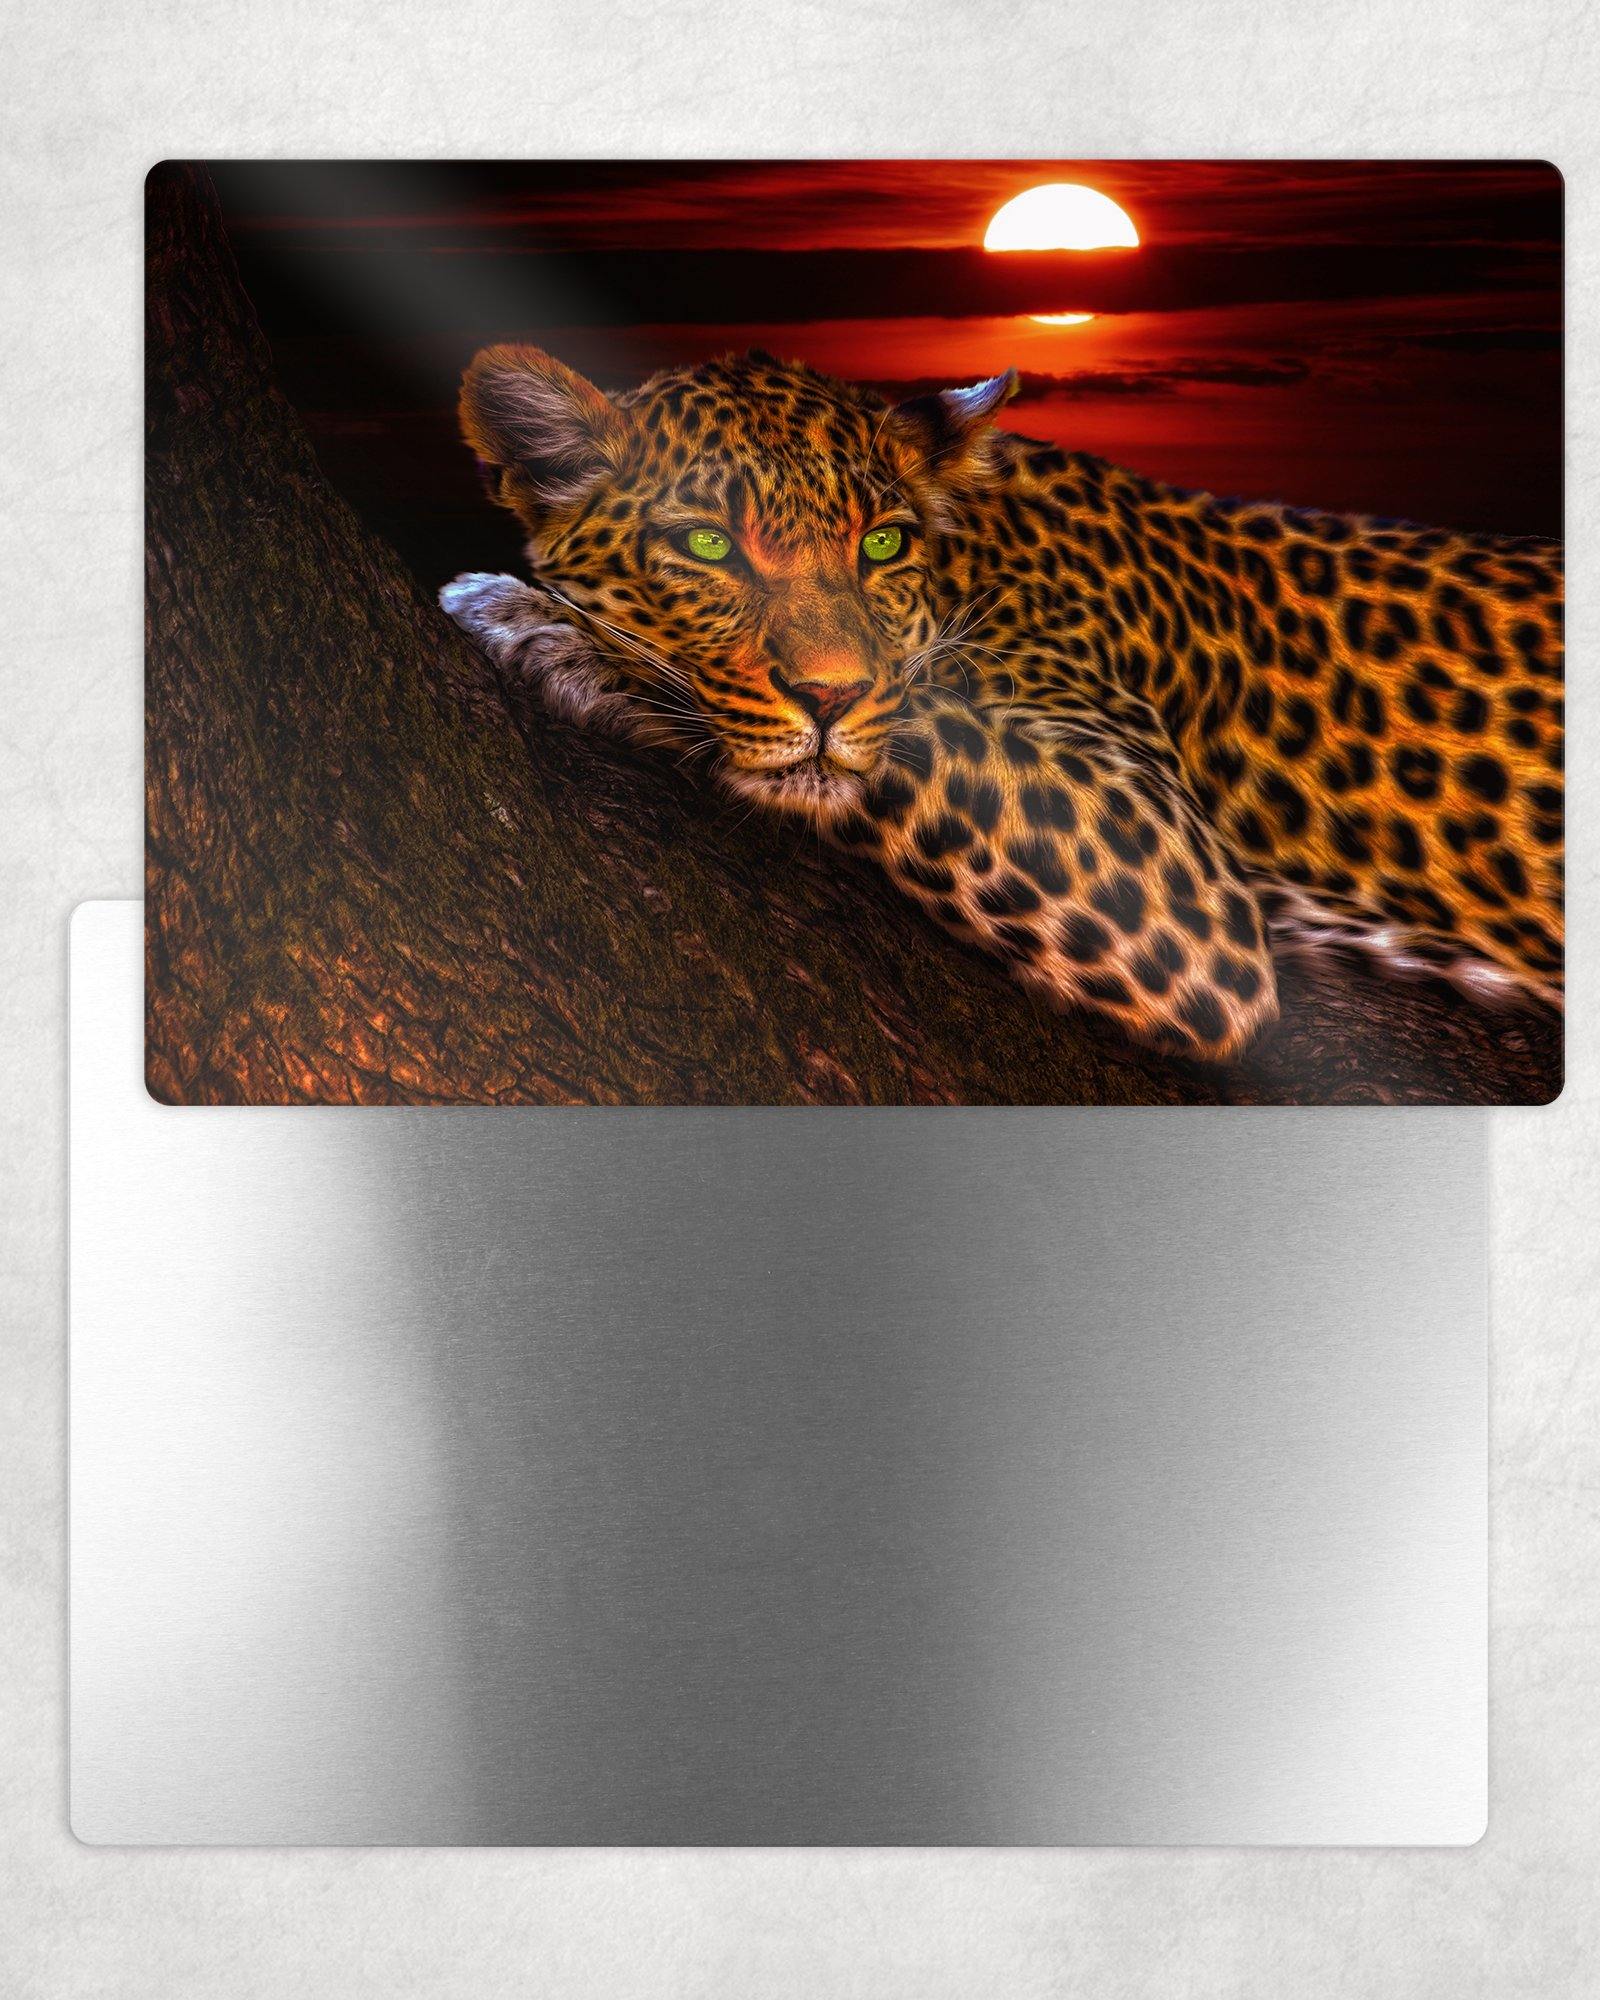 Leopard at Sunset Metal Photo Panel - 8x12 or 12x18 - Schoppix Gifts